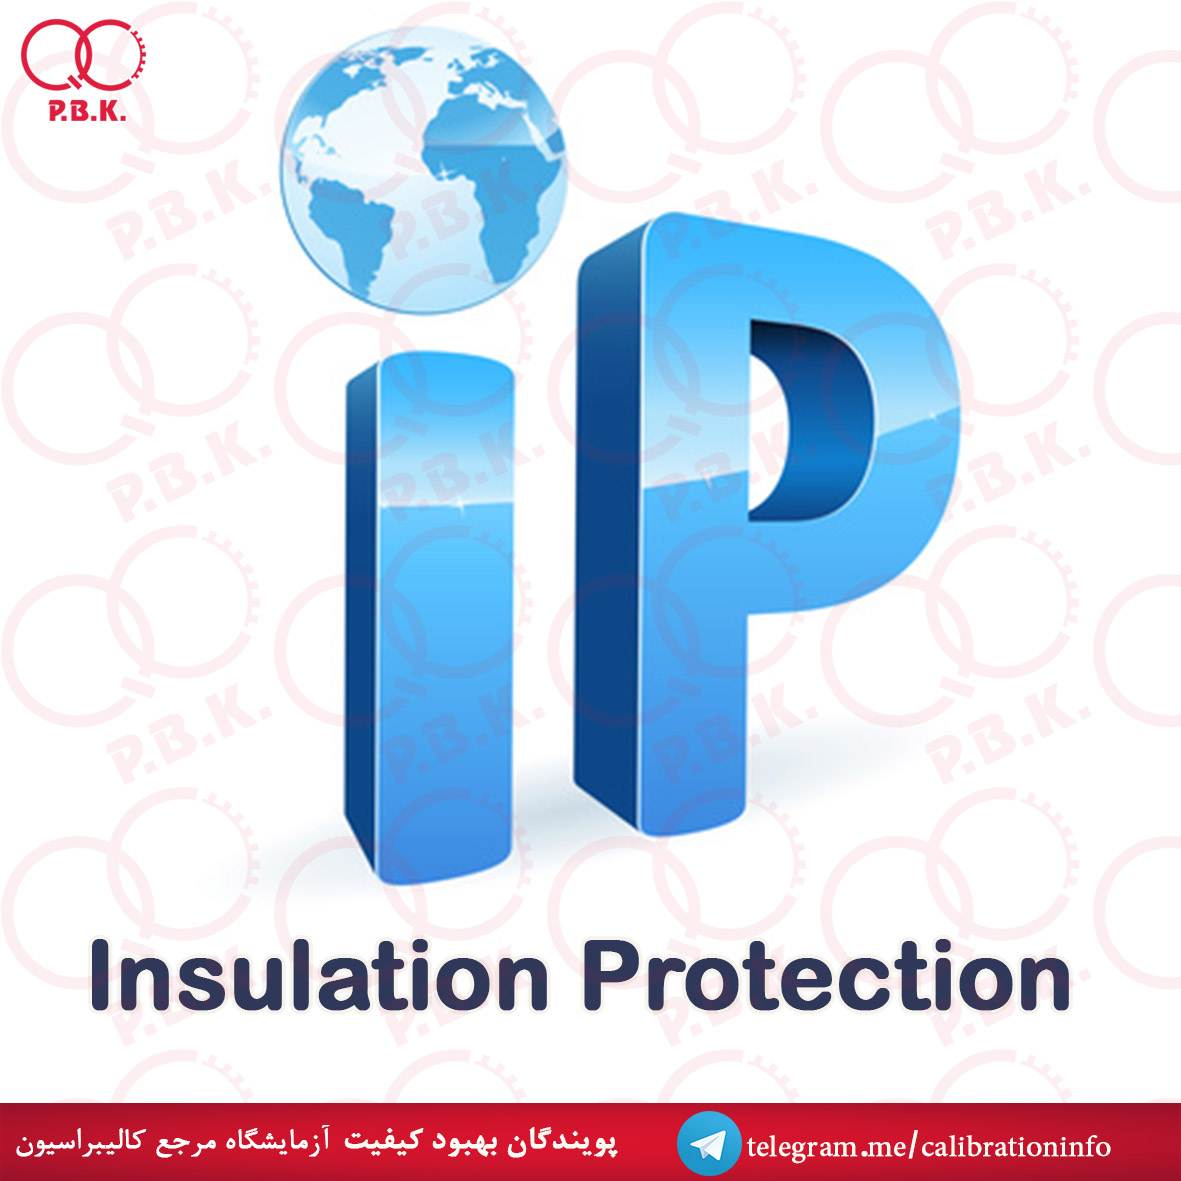 (IP (Insulation protection